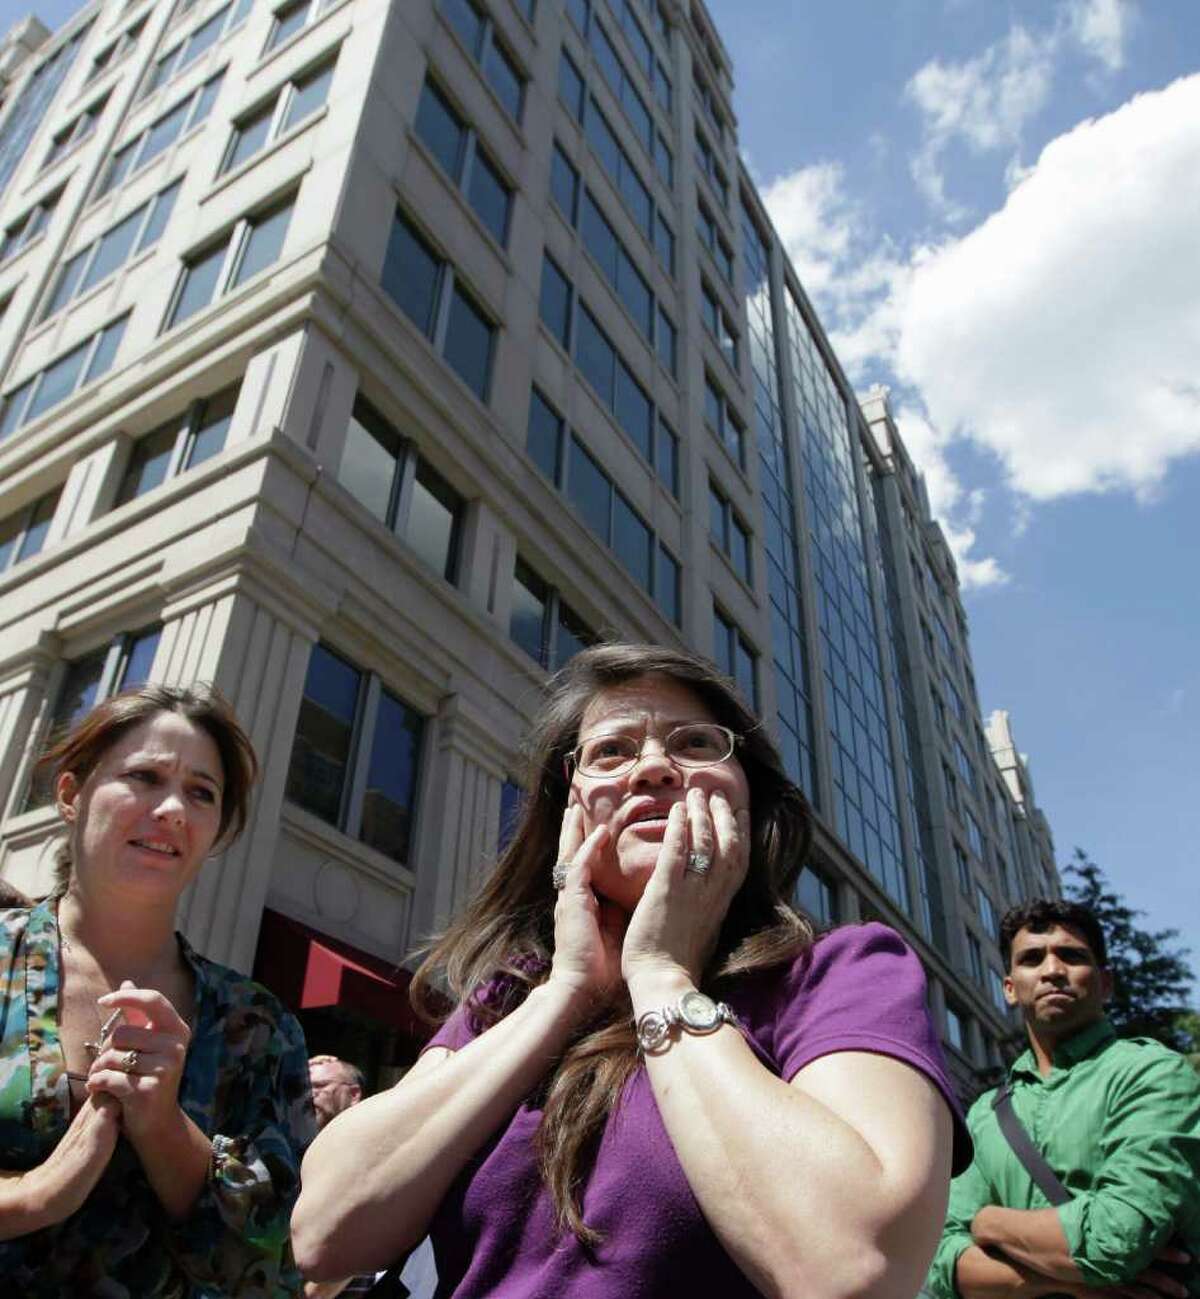 Susy Ward, center, and other office workers gather on the sidewalk in downtown Washington moments after an earthquake shook the nation's capitol, Tuesday, Aug. 23, 2011. The 5.9 magnitude earthquake centered northwest of Richmond, Va., shook much of Washington, D.C., and was felt as far north as Rhode Island and New York City. (AP Photo/J. Scott Applewhite)